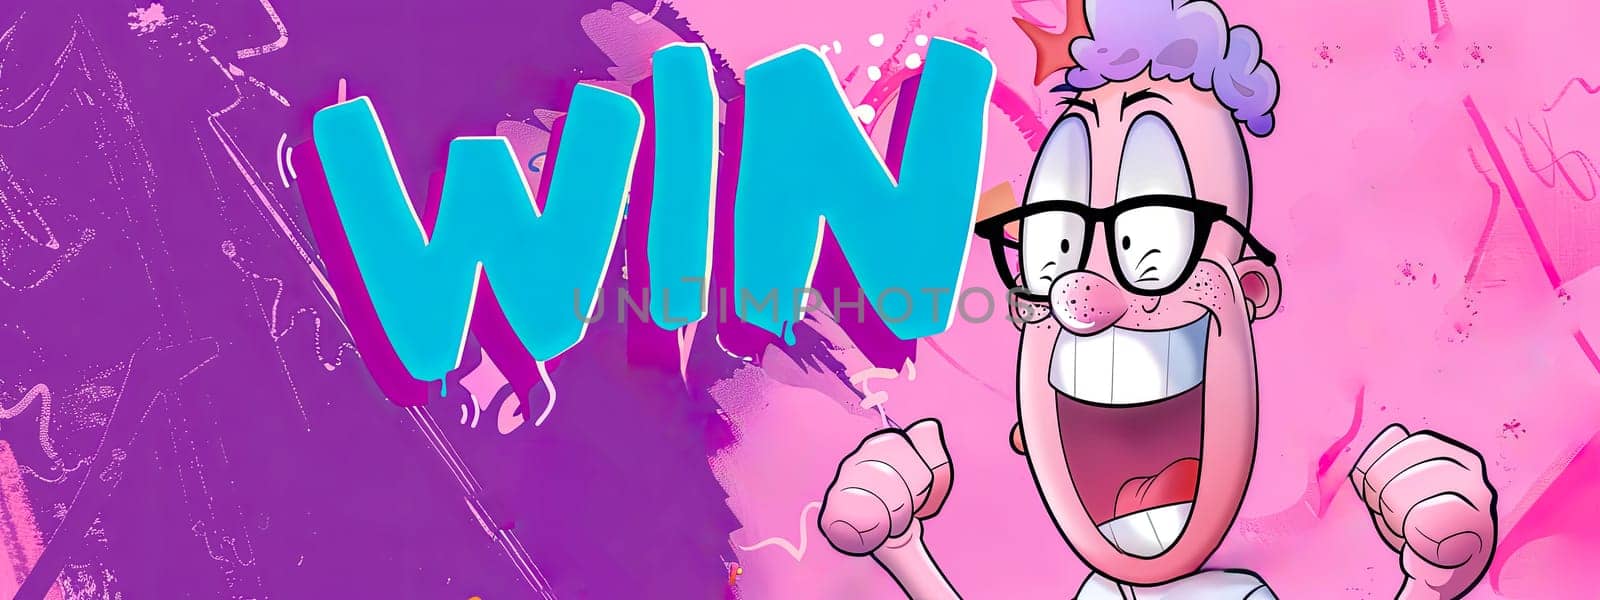 Excited cartoon character celebrating victory with win text by Edophoto